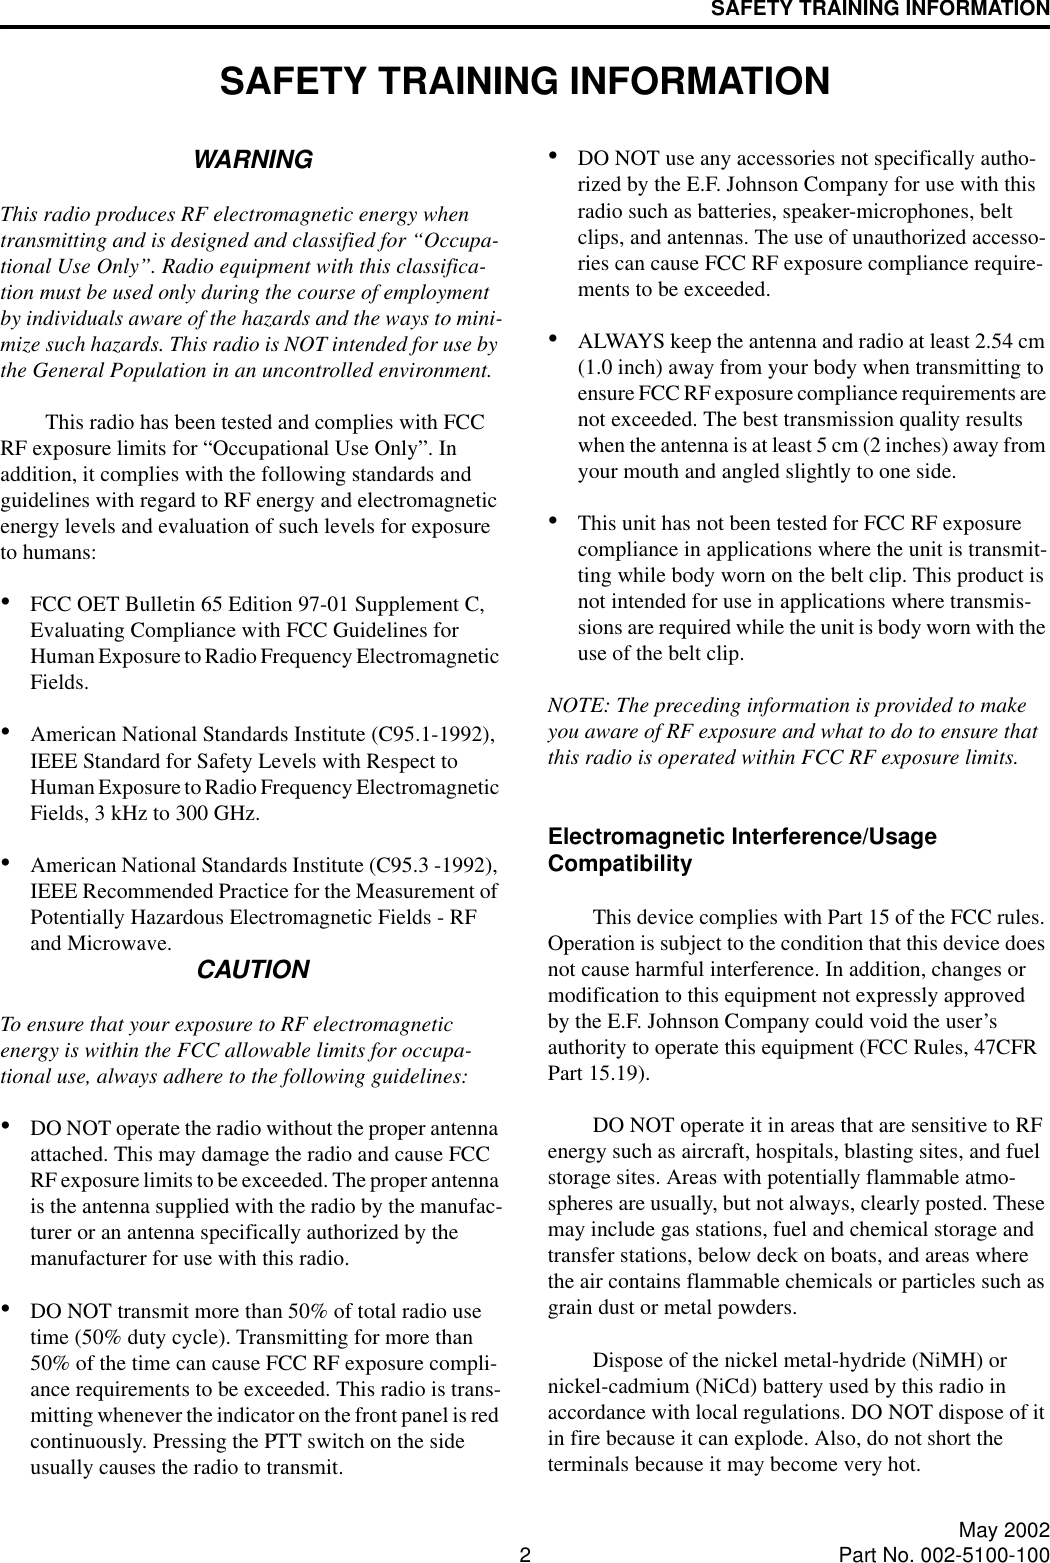 2May 2002Part No. 002-5100-100SAFETY TRAINING INFORMATIONSAFETY TRAINING INFORMATIONWARNINGThis radio produces RF electromagnetic energy when transmitting and is designed and classified for “Occupa-tional Use Only”. Radio equipment with this classifica-tion must be used only during the course of employment by individuals aware of the hazards and the ways to mini-mize such hazards. This radio is NOT intended for use by the General Population in an uncontrolled environment. This radio has been tested and complies with FCC RF exposure limits for “Occupational Use Only”. In addition, it complies with the following standards and guidelines with regard to RF energy and electromagnetic energy levels and evaluation of such levels for exposure to humans:•FCC OET Bulletin 65 Edition 97-01 Supplement C, Evaluating Compliance with FCC Guidelines for Human Exposure to Radio Frequency Electromagnetic Fields.•American National Standards Institute (C95.1-1992), IEEE Standard for Safety Levels with Respect to Human Exposure to Radio Frequency Electromagnetic Fields, 3 kHz to 300 GHz. •American National Standards Institute (C95.3 -1992), IEEE Recommended Practice for the Measurement of Potentially Hazardous Electromagnetic Fields - RF and Microwave. CAUTIONTo ensure that your exposure to RF electromagnetic energy is within the FCC allowable limits for occupa-tional use, always adhere to the following guidelines:•DO NOT operate the radio without the proper antenna attached. This may damage the radio and cause FCC RF exposure limits to be exceeded. The proper antenna is the antenna supplied with the radio by the manufac-turer or an antenna specifically authorized by the manufacturer for use with this radio.•DO NOT transmit more than 50% of total radio use time (50% duty cycle). Transmitting for more than 50% of the time can cause FCC RF exposure compli-ance requirements to be exceeded. This radio is trans-mitting whenever the indicator on the front panel is red continuously. Pressing the PTT switch on the side usually causes the radio to transmit. •DO NOT use any accessories not specifically autho-rized by the E.F. Johnson Company for use with this radio such as batteries, speaker-microphones, belt clips, and antennas. The use of unauthorized accesso-ries can cause FCC RF exposure compliance require-ments to be exceeded.•ALWAYS keep the antenna and radio at least 2.54 cm (1.0 inch) away from your body when transmitting to ensure FCC RF exposure compliance requirements are not exceeded. The best transmission quality results when the antenna is at least 5 cm (2 inches) away from your mouth and angled slightly to one side.•This unit has not been tested for FCC RF exposure compliance in applications where the unit is transmit-ting while body worn on the belt clip. This product is not intended for use in applications where transmis-sions are required while the unit is body worn with the use of the belt clip.NOTE: The preceding information is provided to make you aware of RF exposure and what to do to ensure that this radio is operated within FCC RF exposure limits.Electromagnetic Interference/Usage CompatibilityThis device complies with Part 15 of the FCC rules. Operation is subject to the condition that this device does not cause harmful interference. In addition, changes or modification to this equipment not expressly approved by the E.F. Johnson Company could void the user’s authority to operate this equipment (FCC Rules, 47CFR Part 15.19).DO NOT operate it in areas that are sensitive to RF energy such as aircraft, hospitals, blasting sites, and fuel storage sites. Areas with potentially flammable atmo-spheres are usually, but not always, clearly posted. These may include gas stations, fuel and chemical storage and transfer stations, below deck on boats, and areas where the air contains flammable chemicals or particles such as grain dust or metal powders. Dispose of the nickel metal-hydride (NiMH) or nickel-cadmium (NiCd) battery used by this radio in accordance with local regulations. DO NOT dispose of it in fire because it can explode. Also, do not short the terminals because it may become very hot.